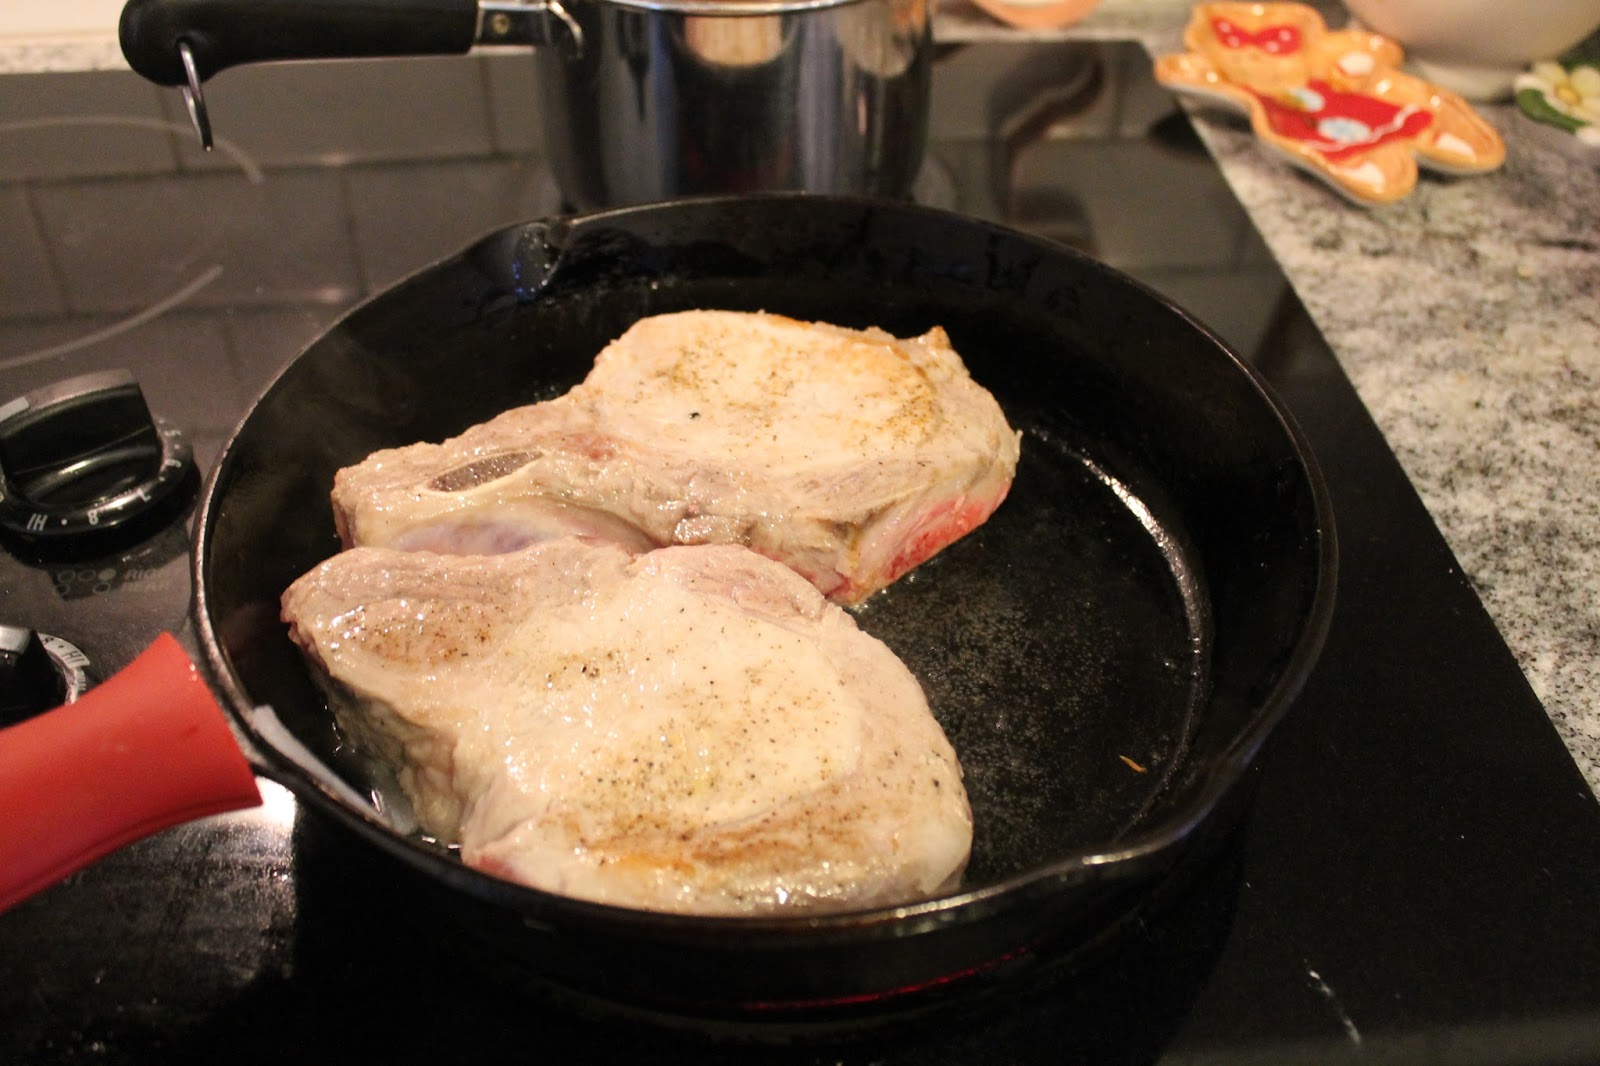 Dinner with the Grobmyers: Paula Deen Onion Smothered Pork Chops